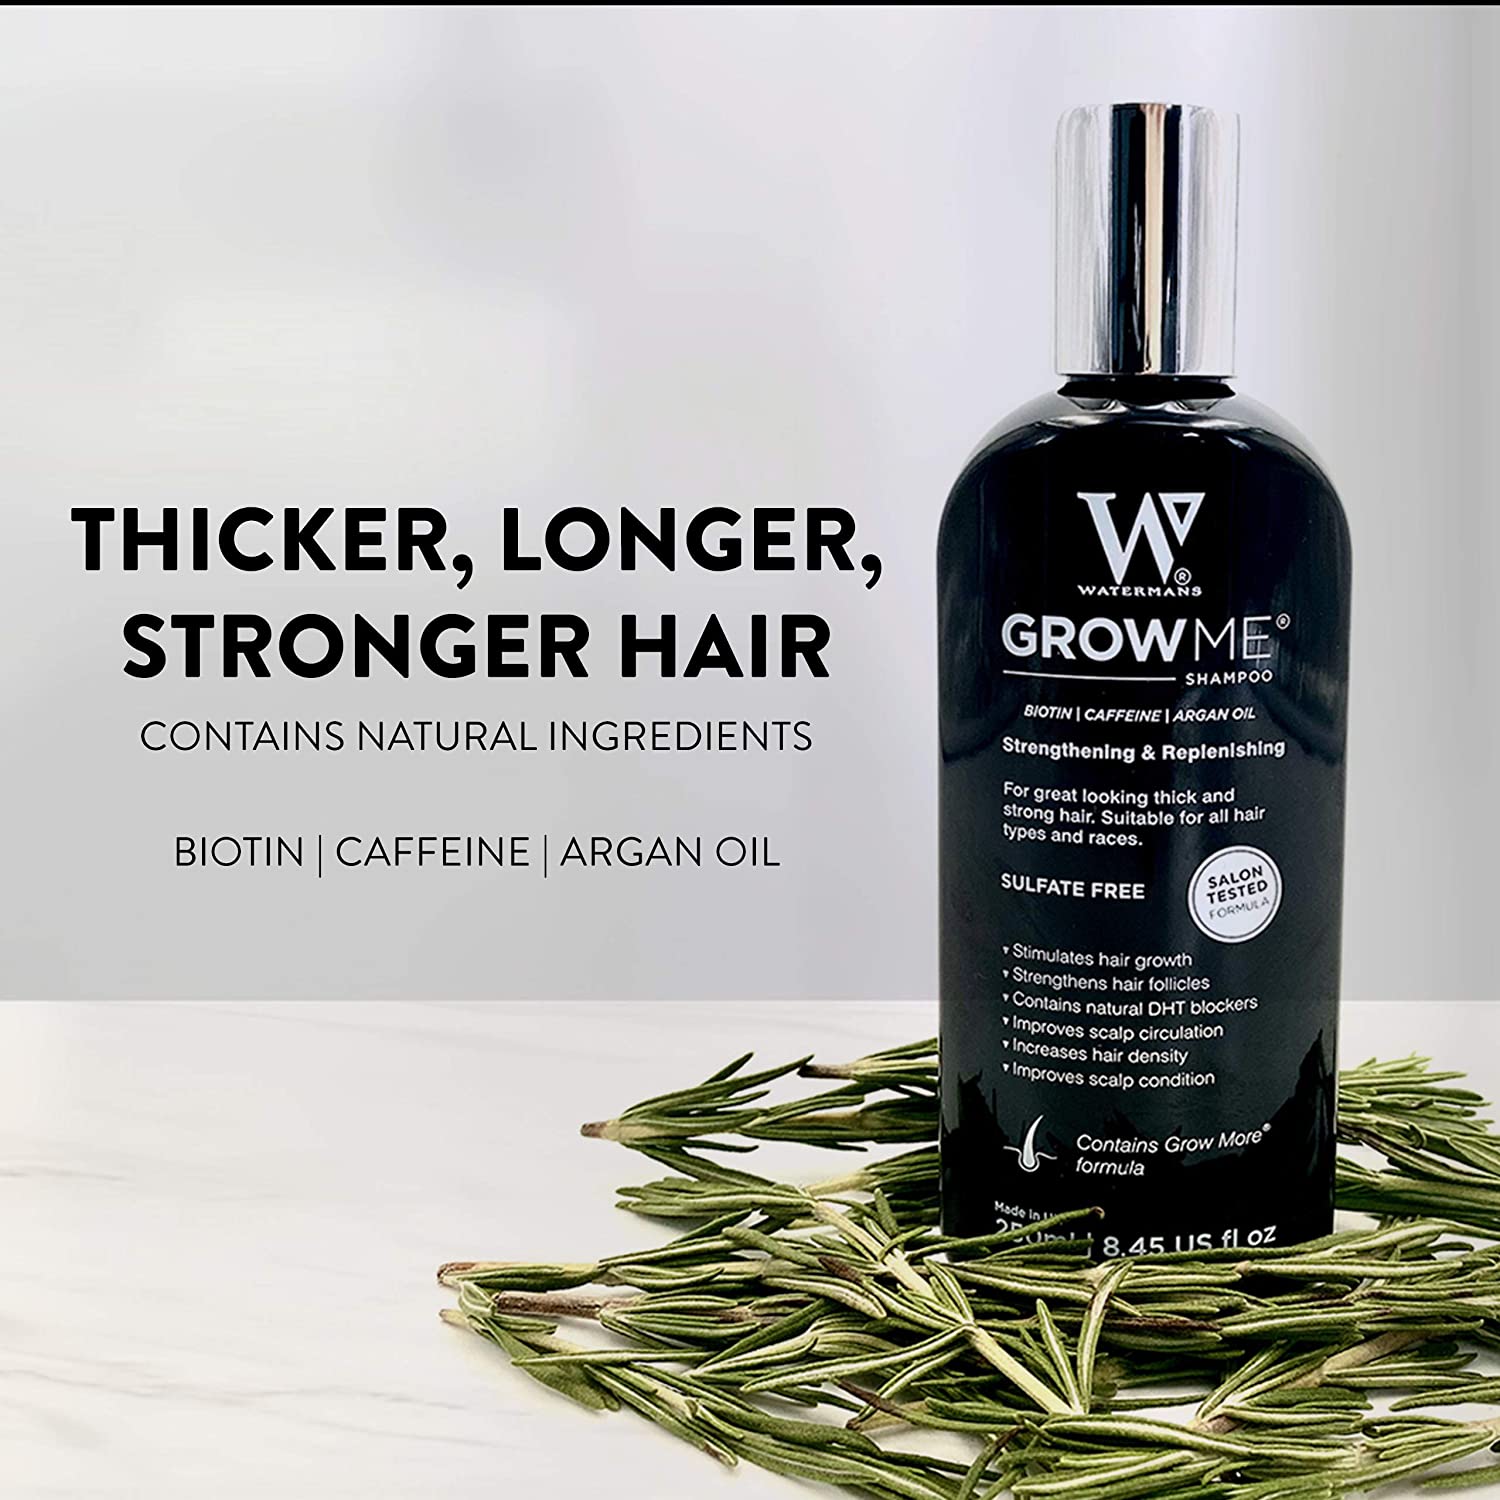 watermans-grow-me-shampoo-review-care-your-hair